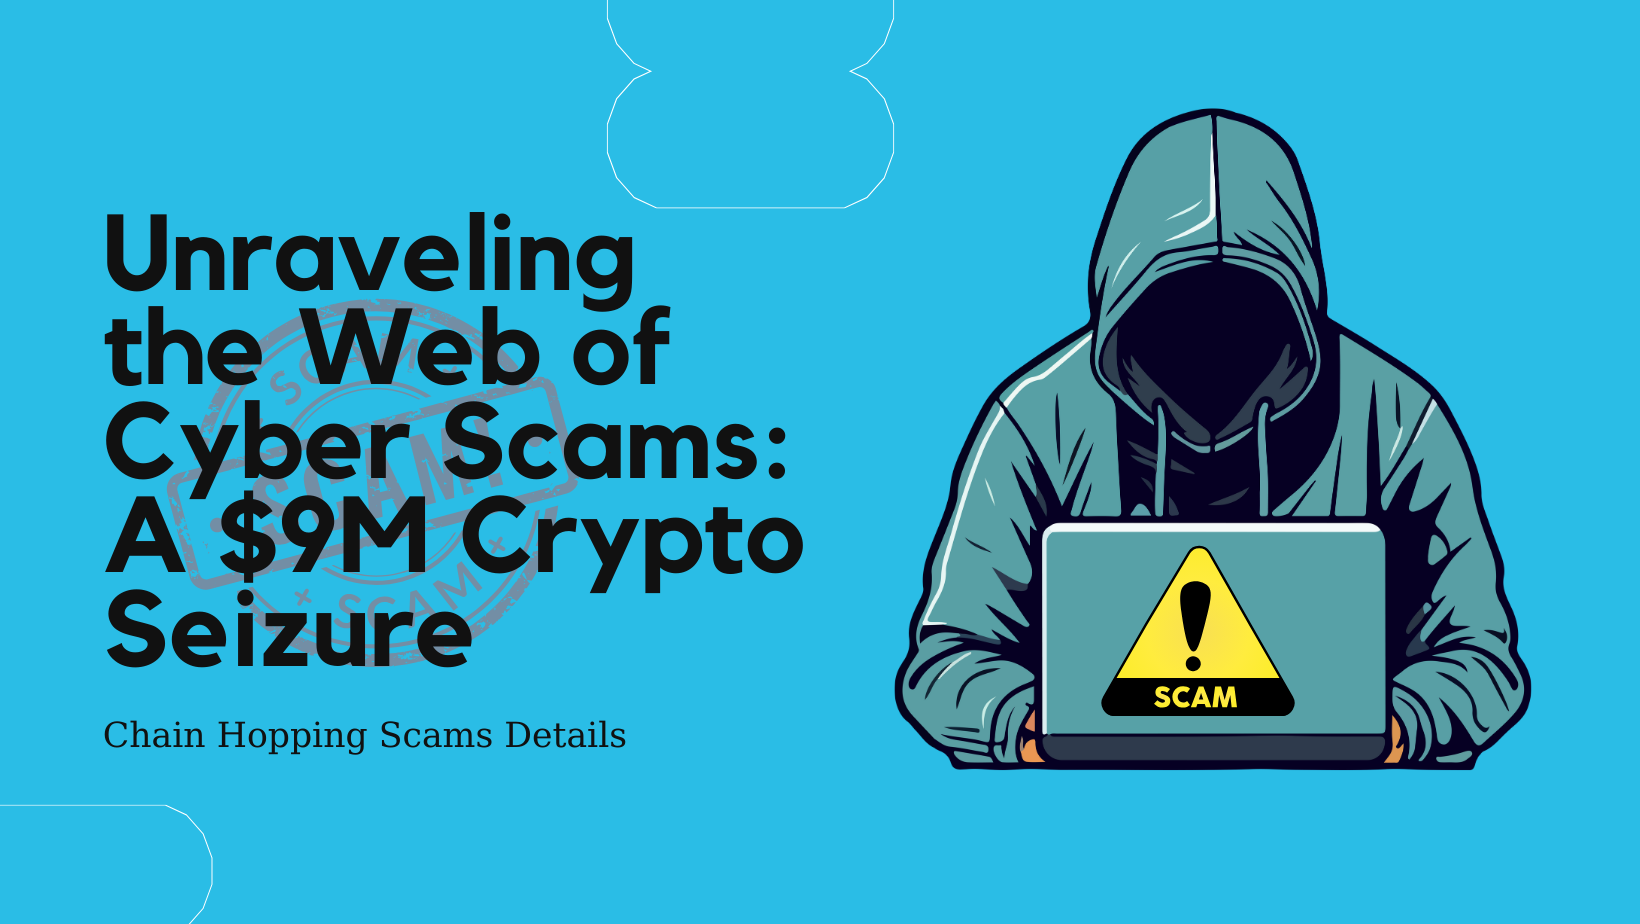 Unraveling the Web of Cyber Scams A 9M Crypto Seizure